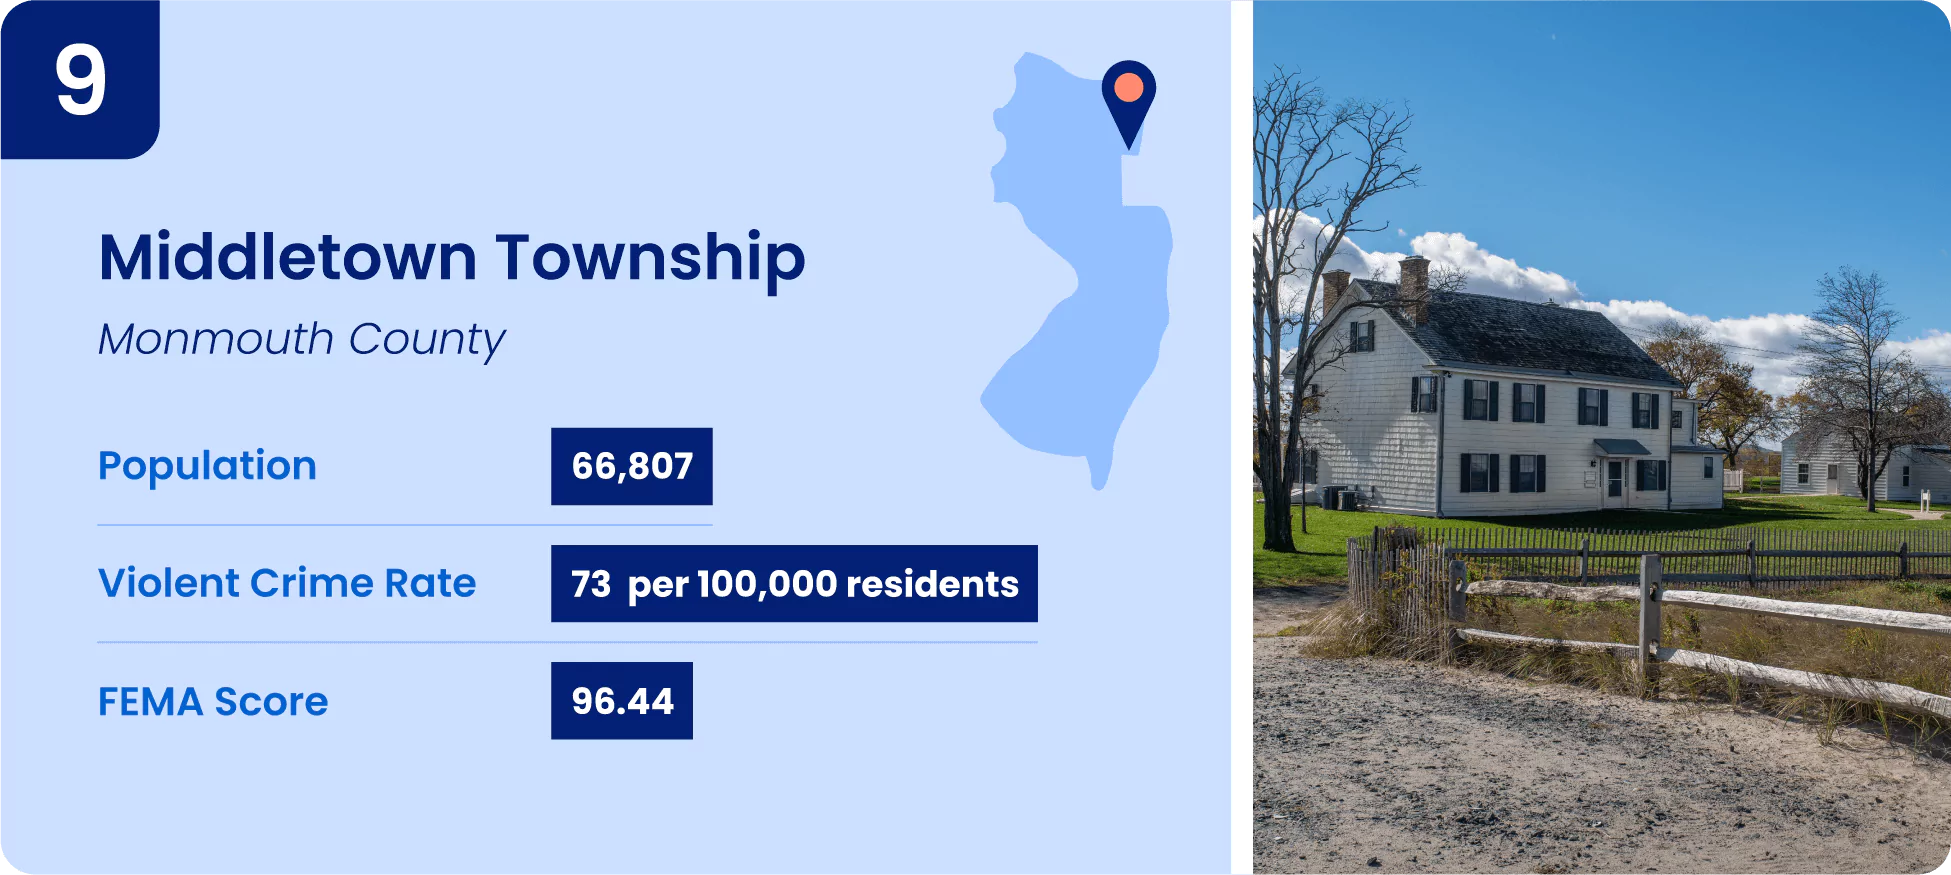 Image shows key information for one of the safest cities in New Jersey, Middletown Township.